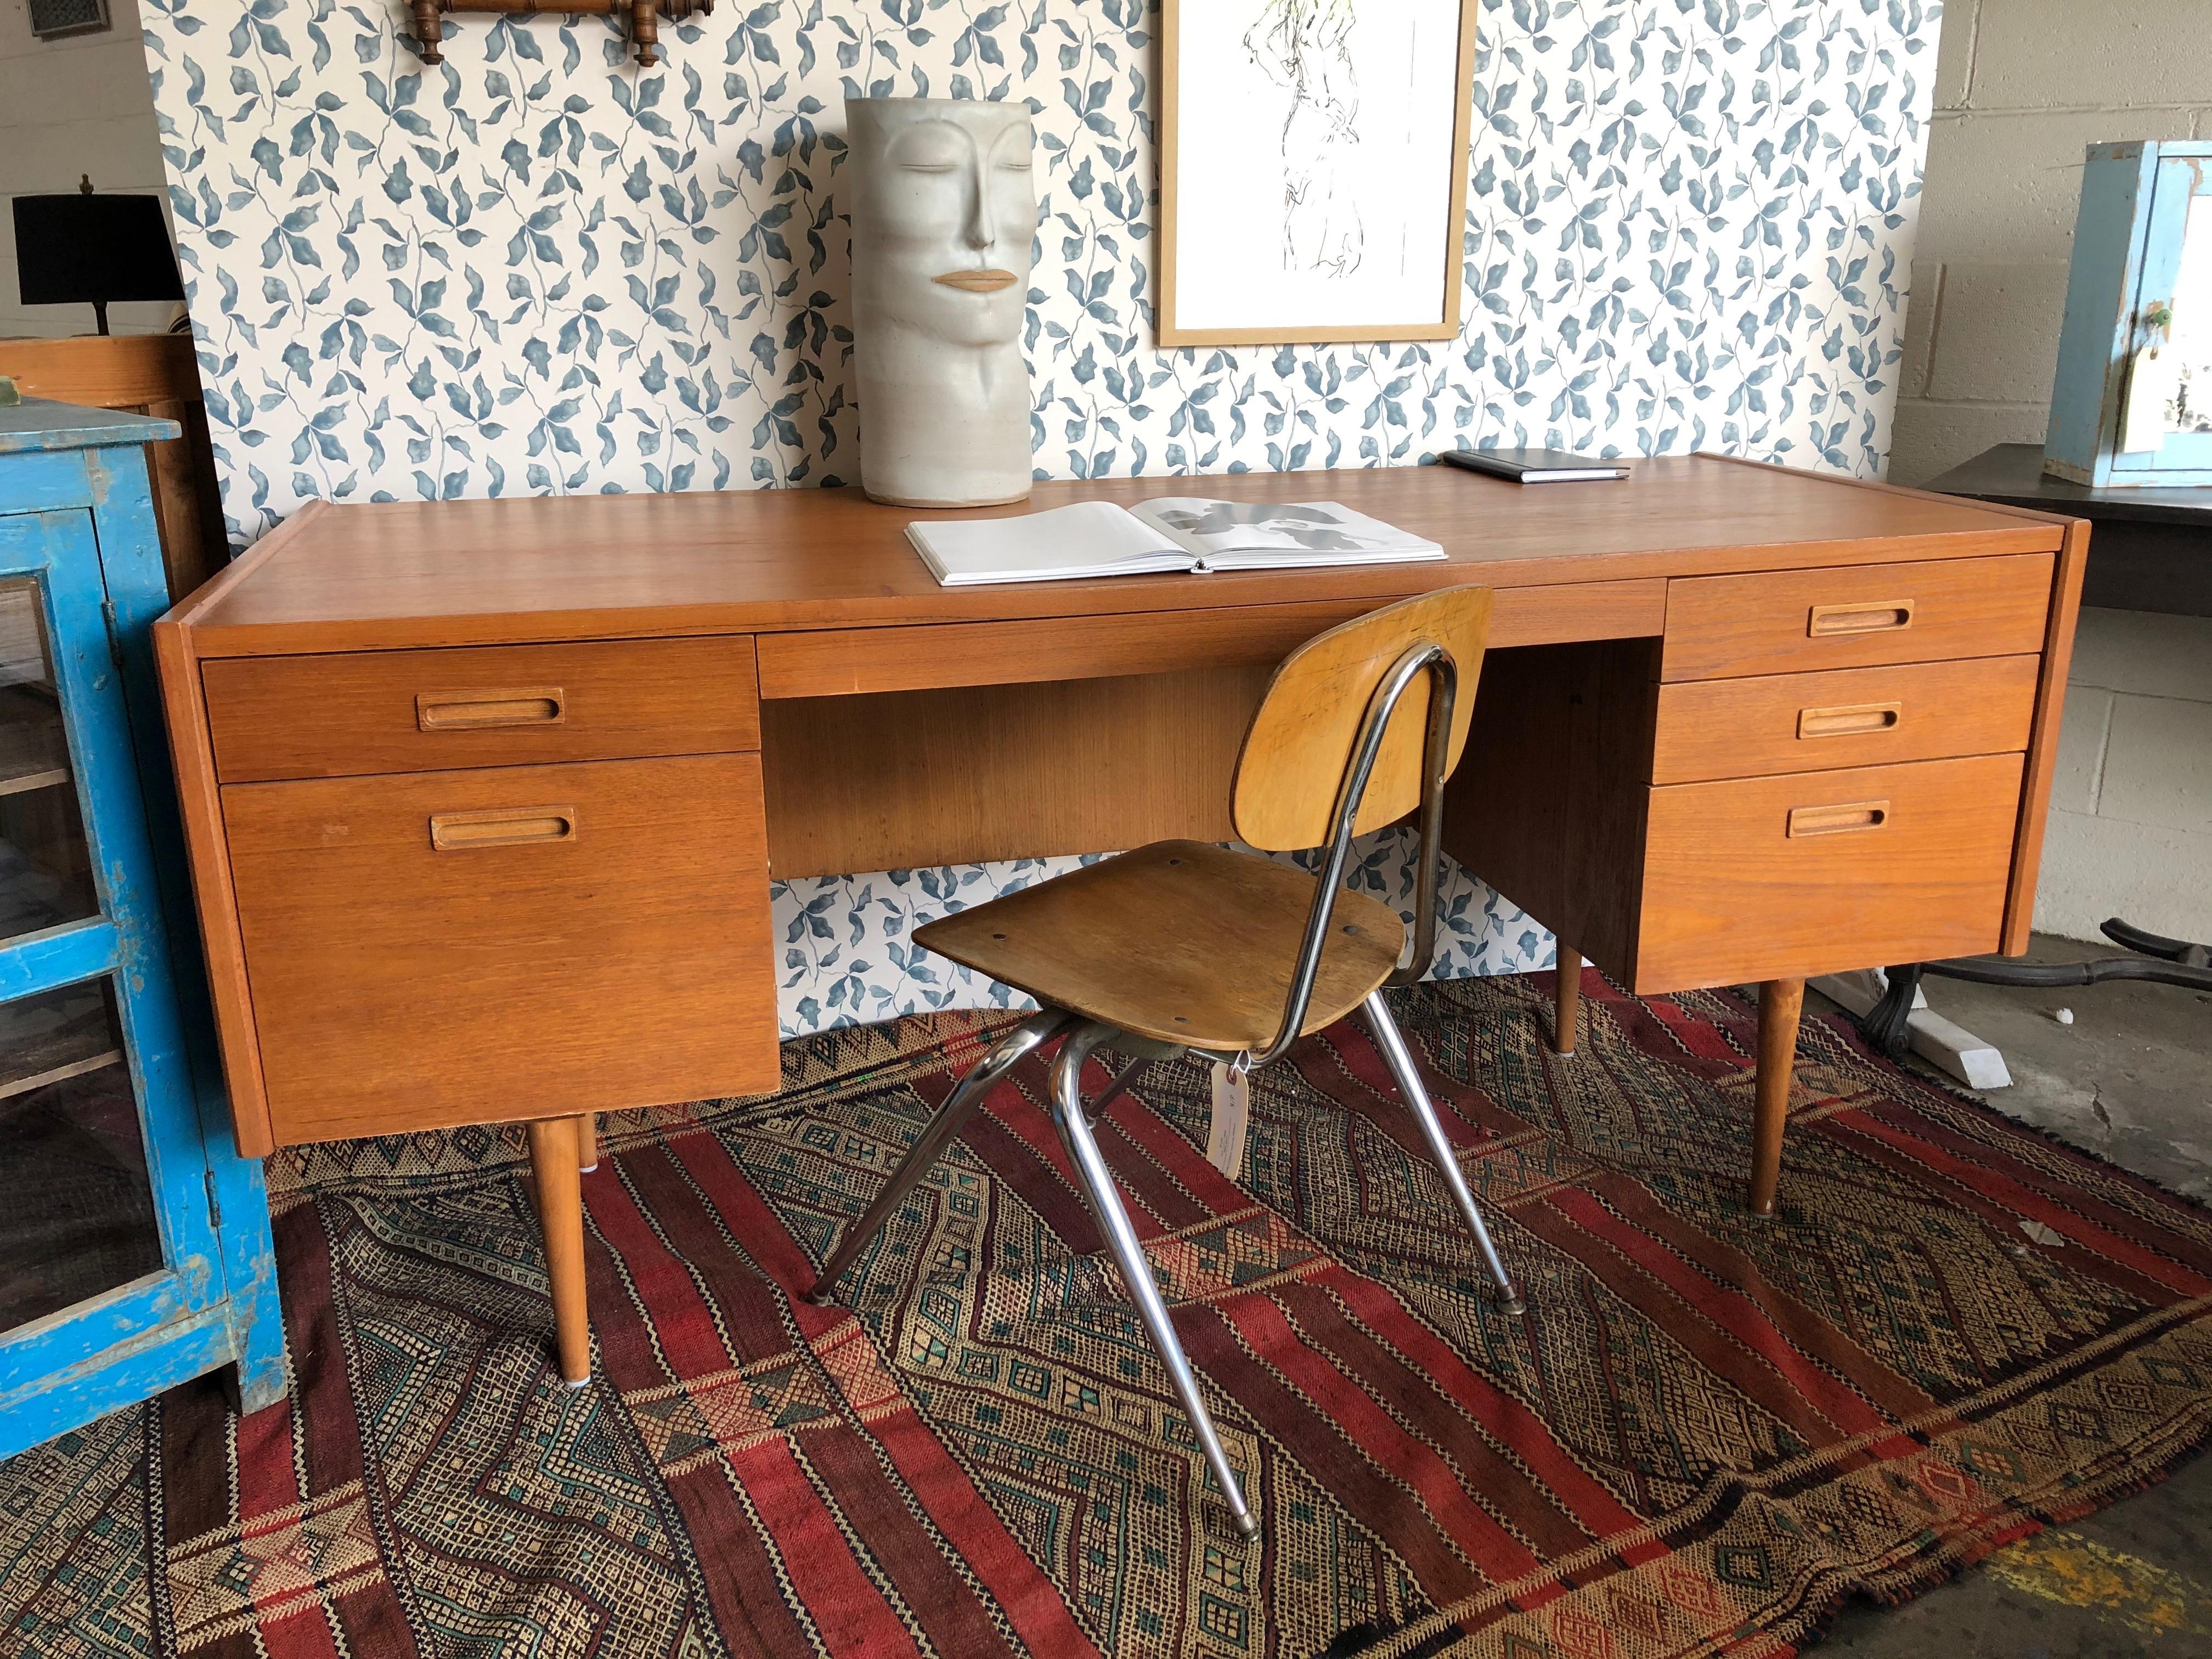 This mid century desk features draws that slide out and sleek peg legs. Perfect for a study or at-home office. 

Our vintage pieces have been thoughtfully selected for their incredible craftsmanship and unique character that will compliment any